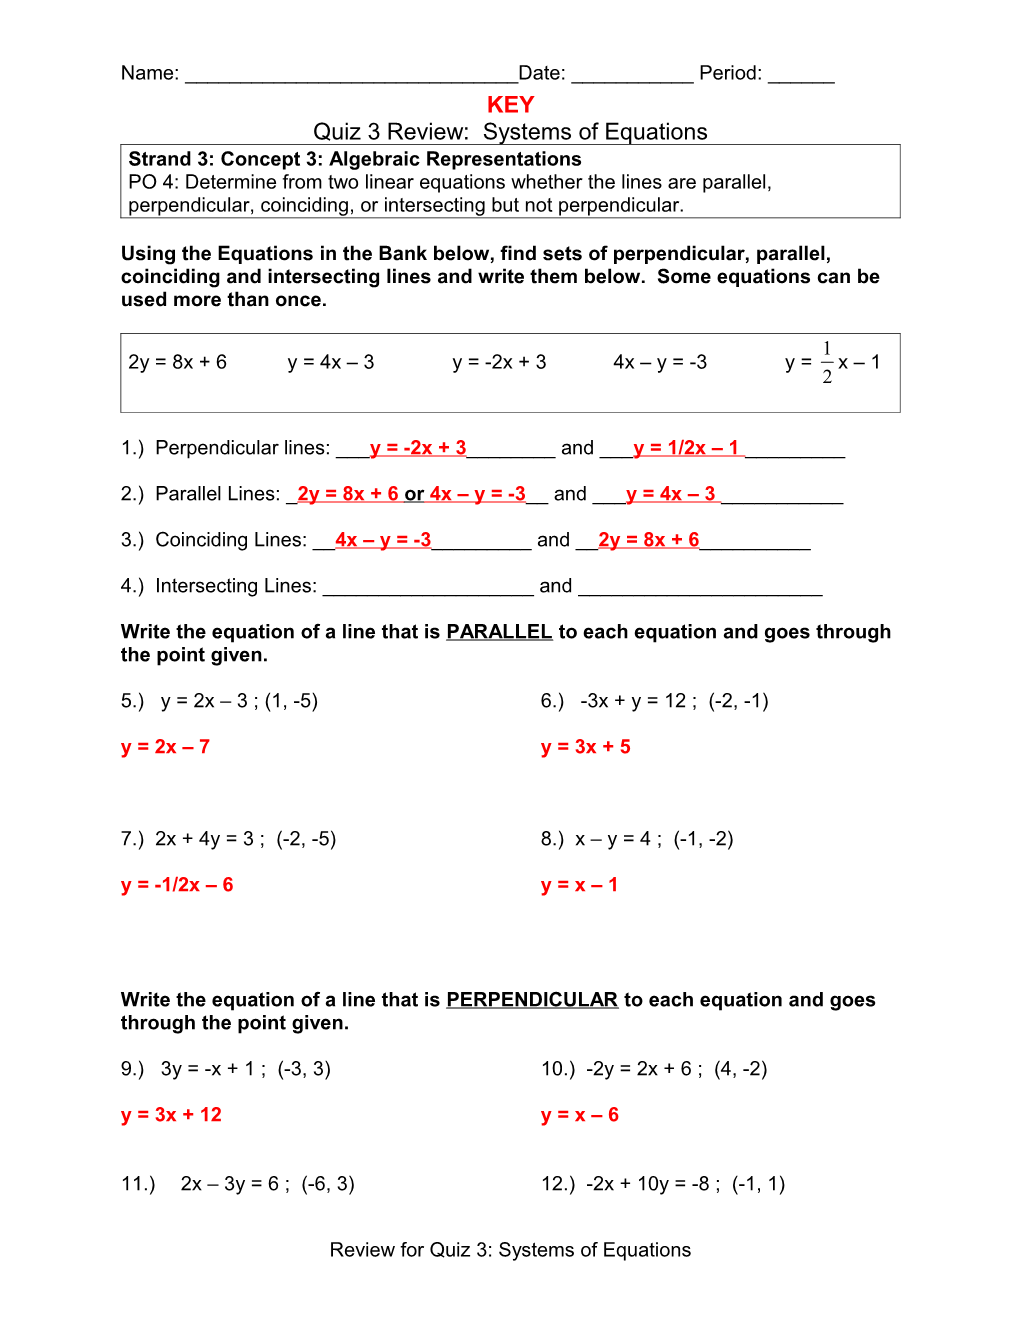 Year 1 Quiz: Systems of Equations